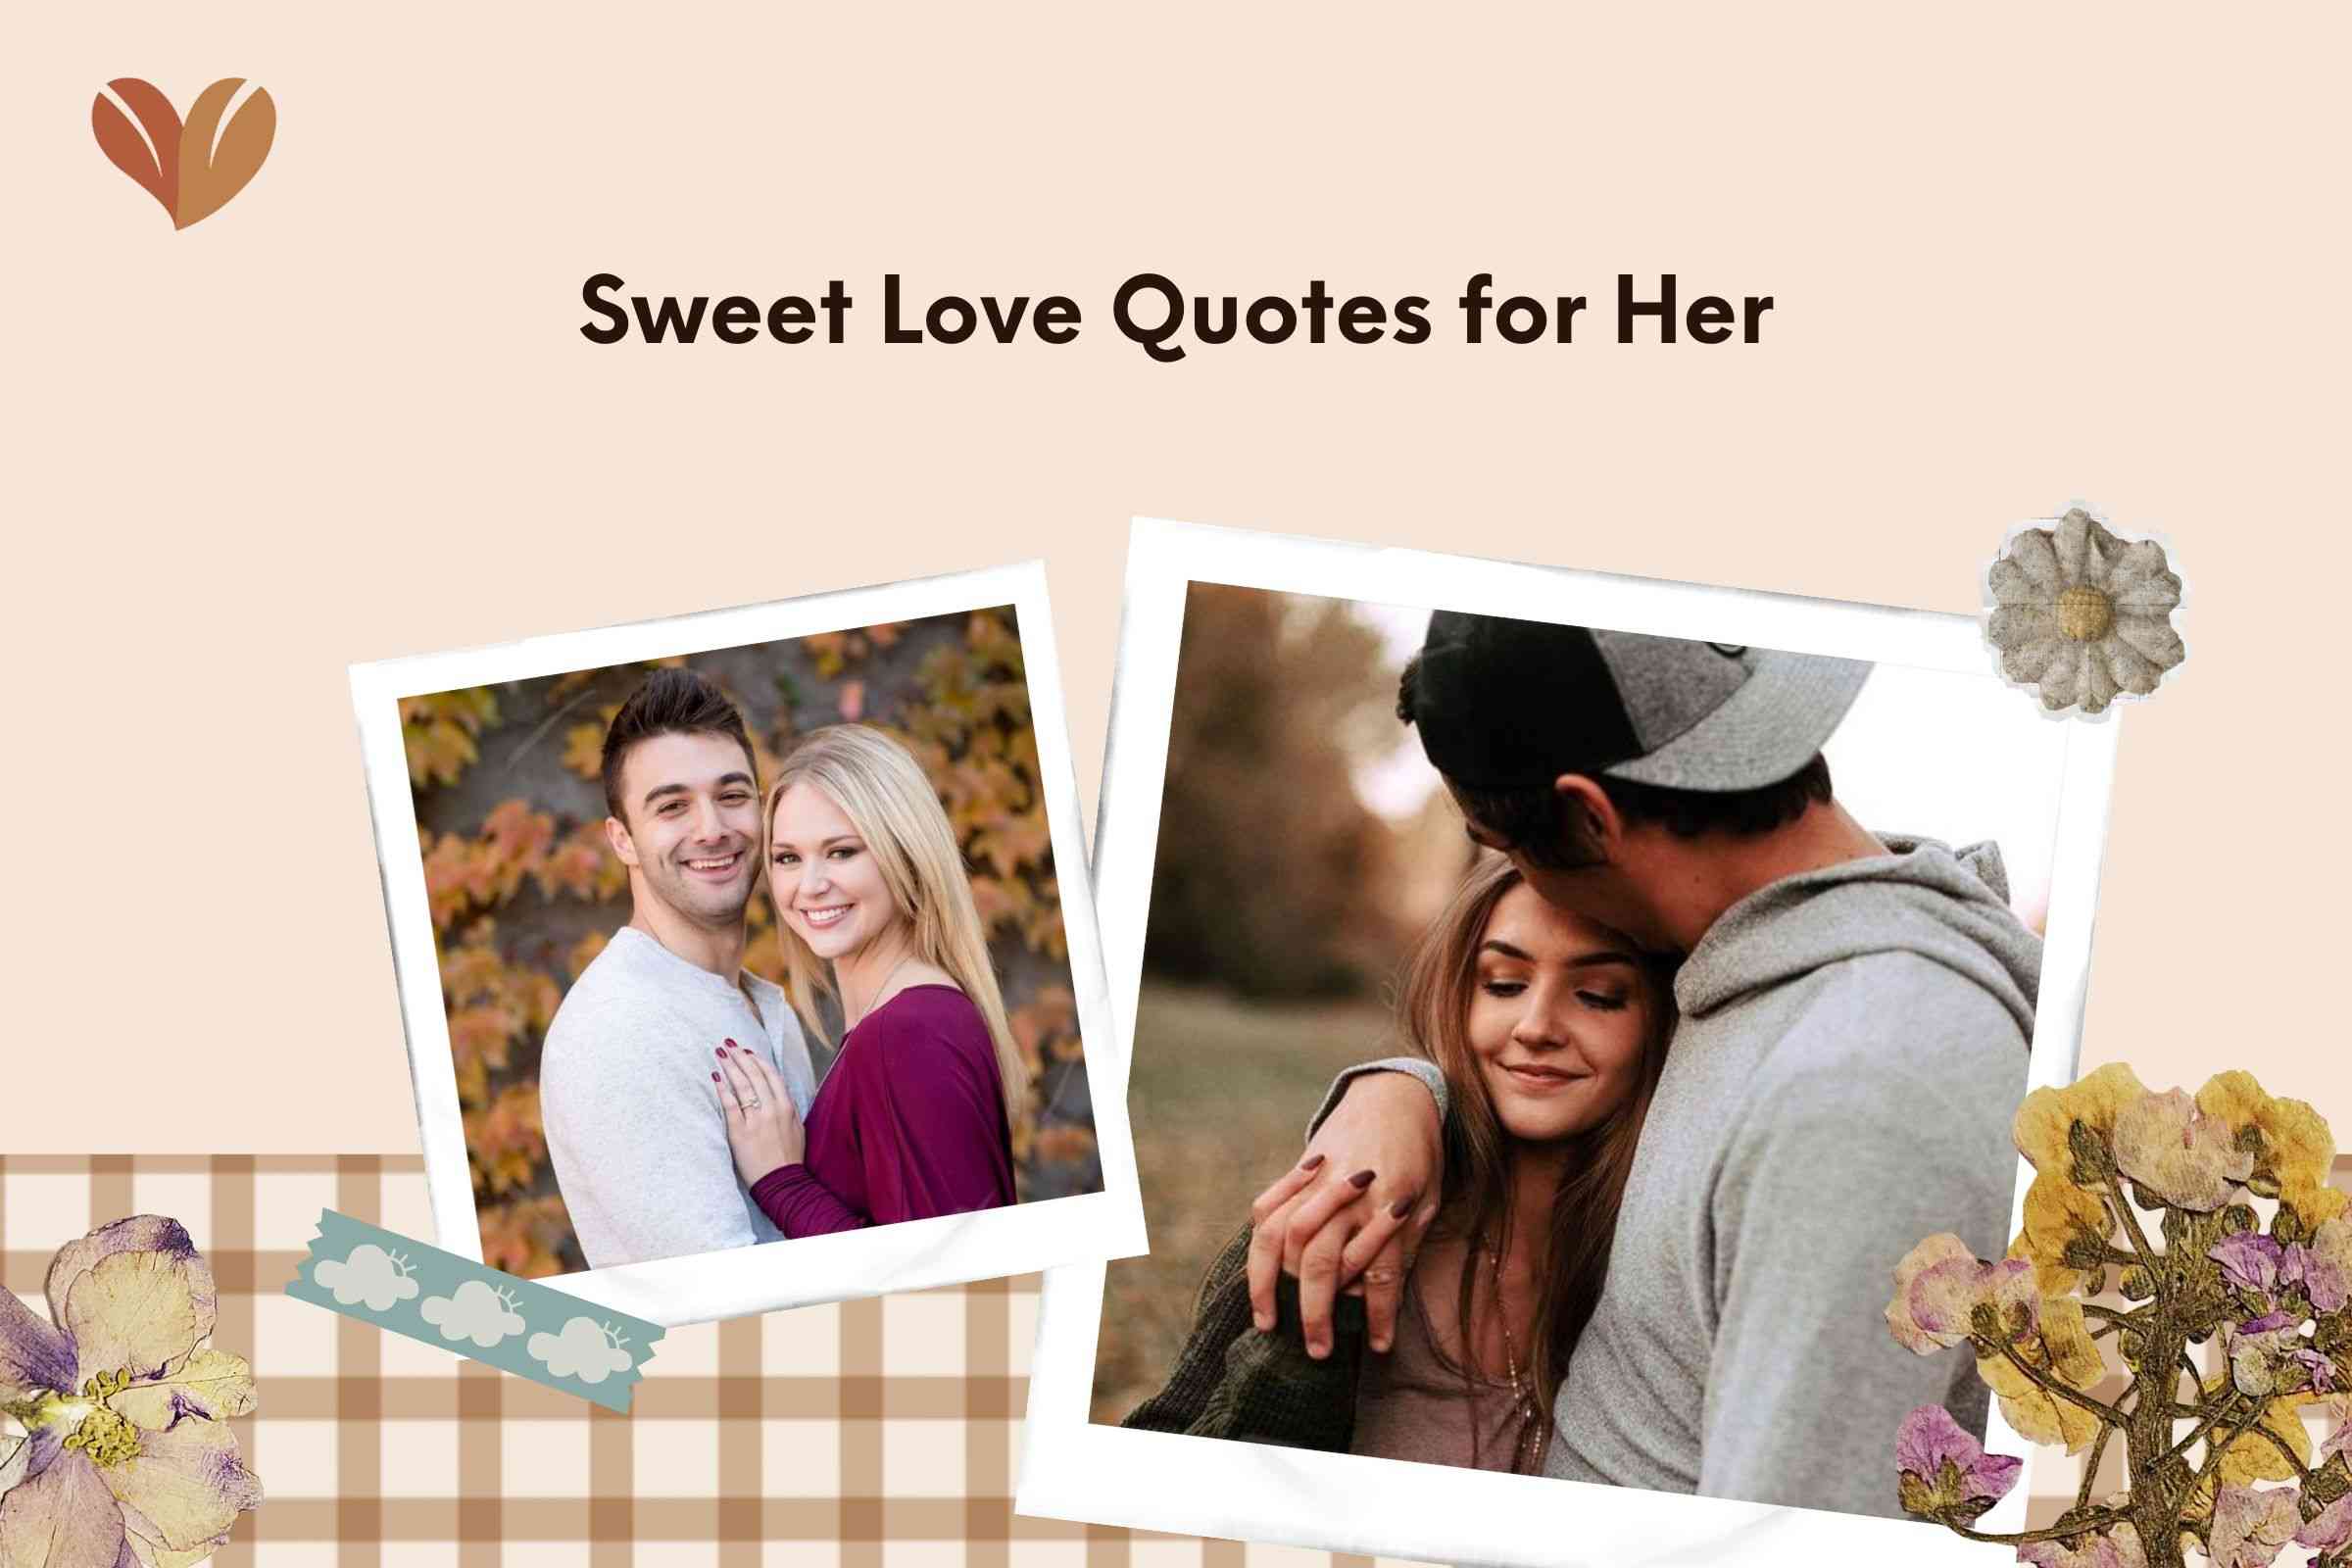 Sweet Love Quotes for Her